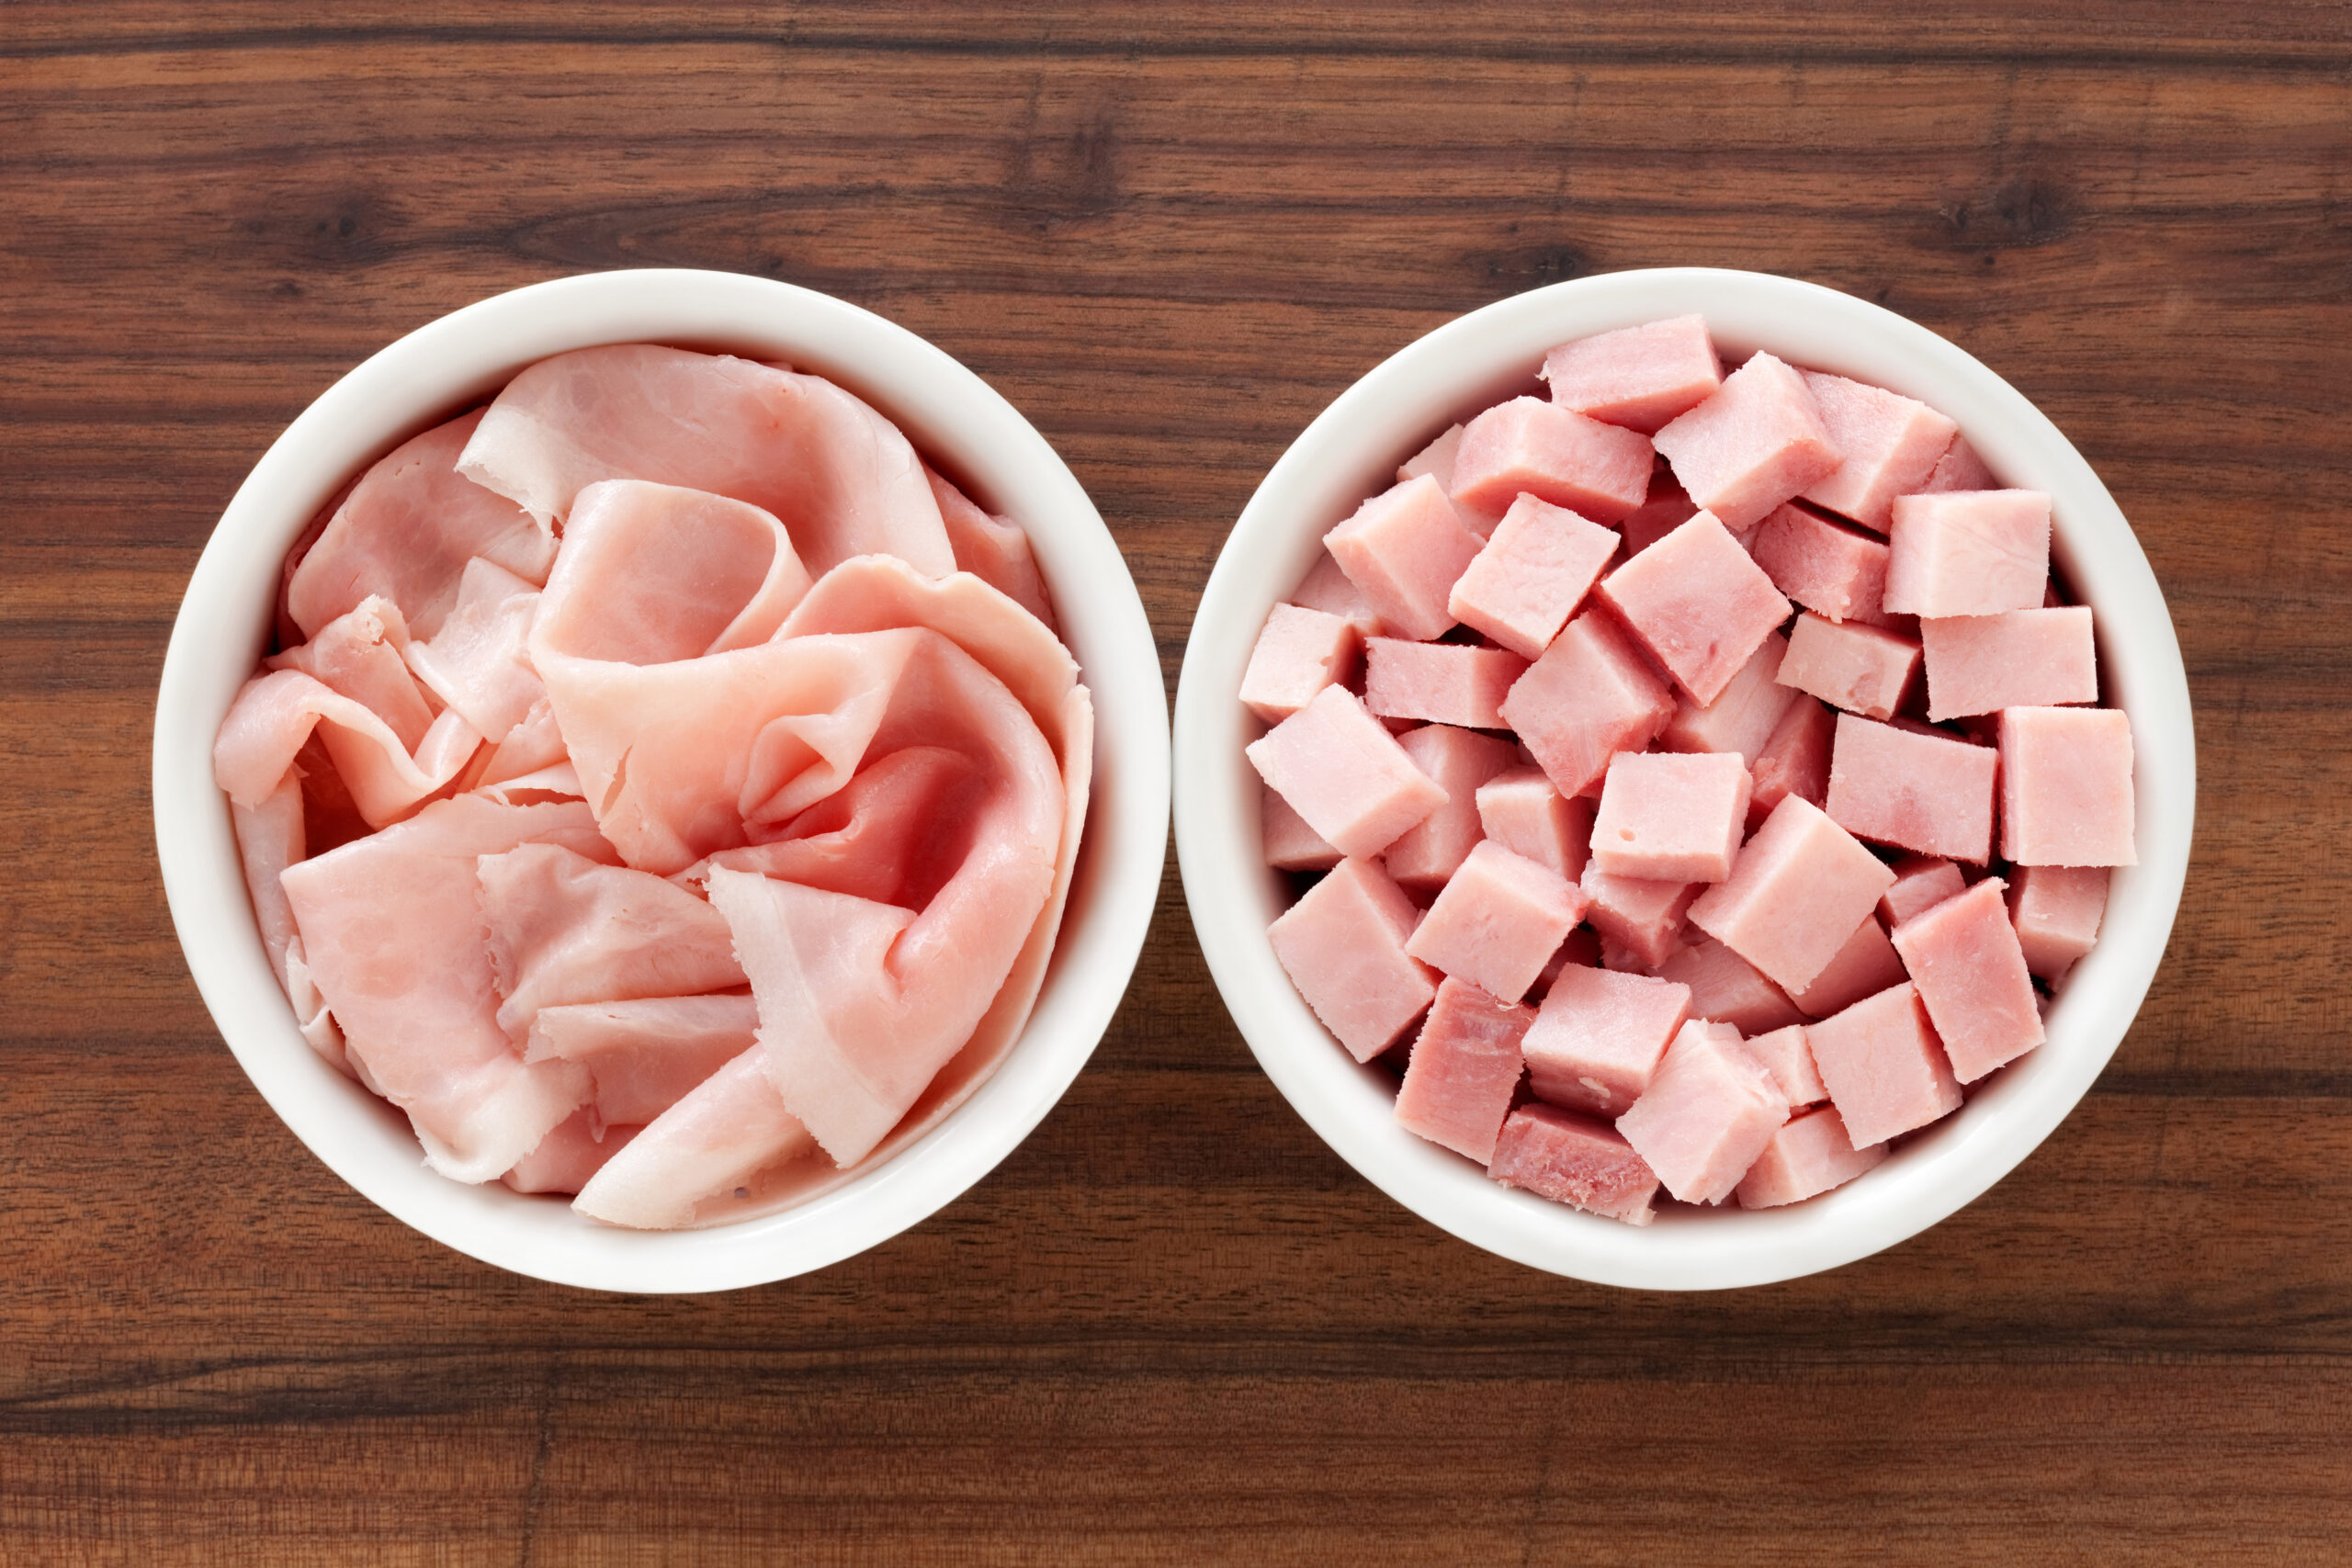 Top view of two bowls side by side with sliced and cubed ham